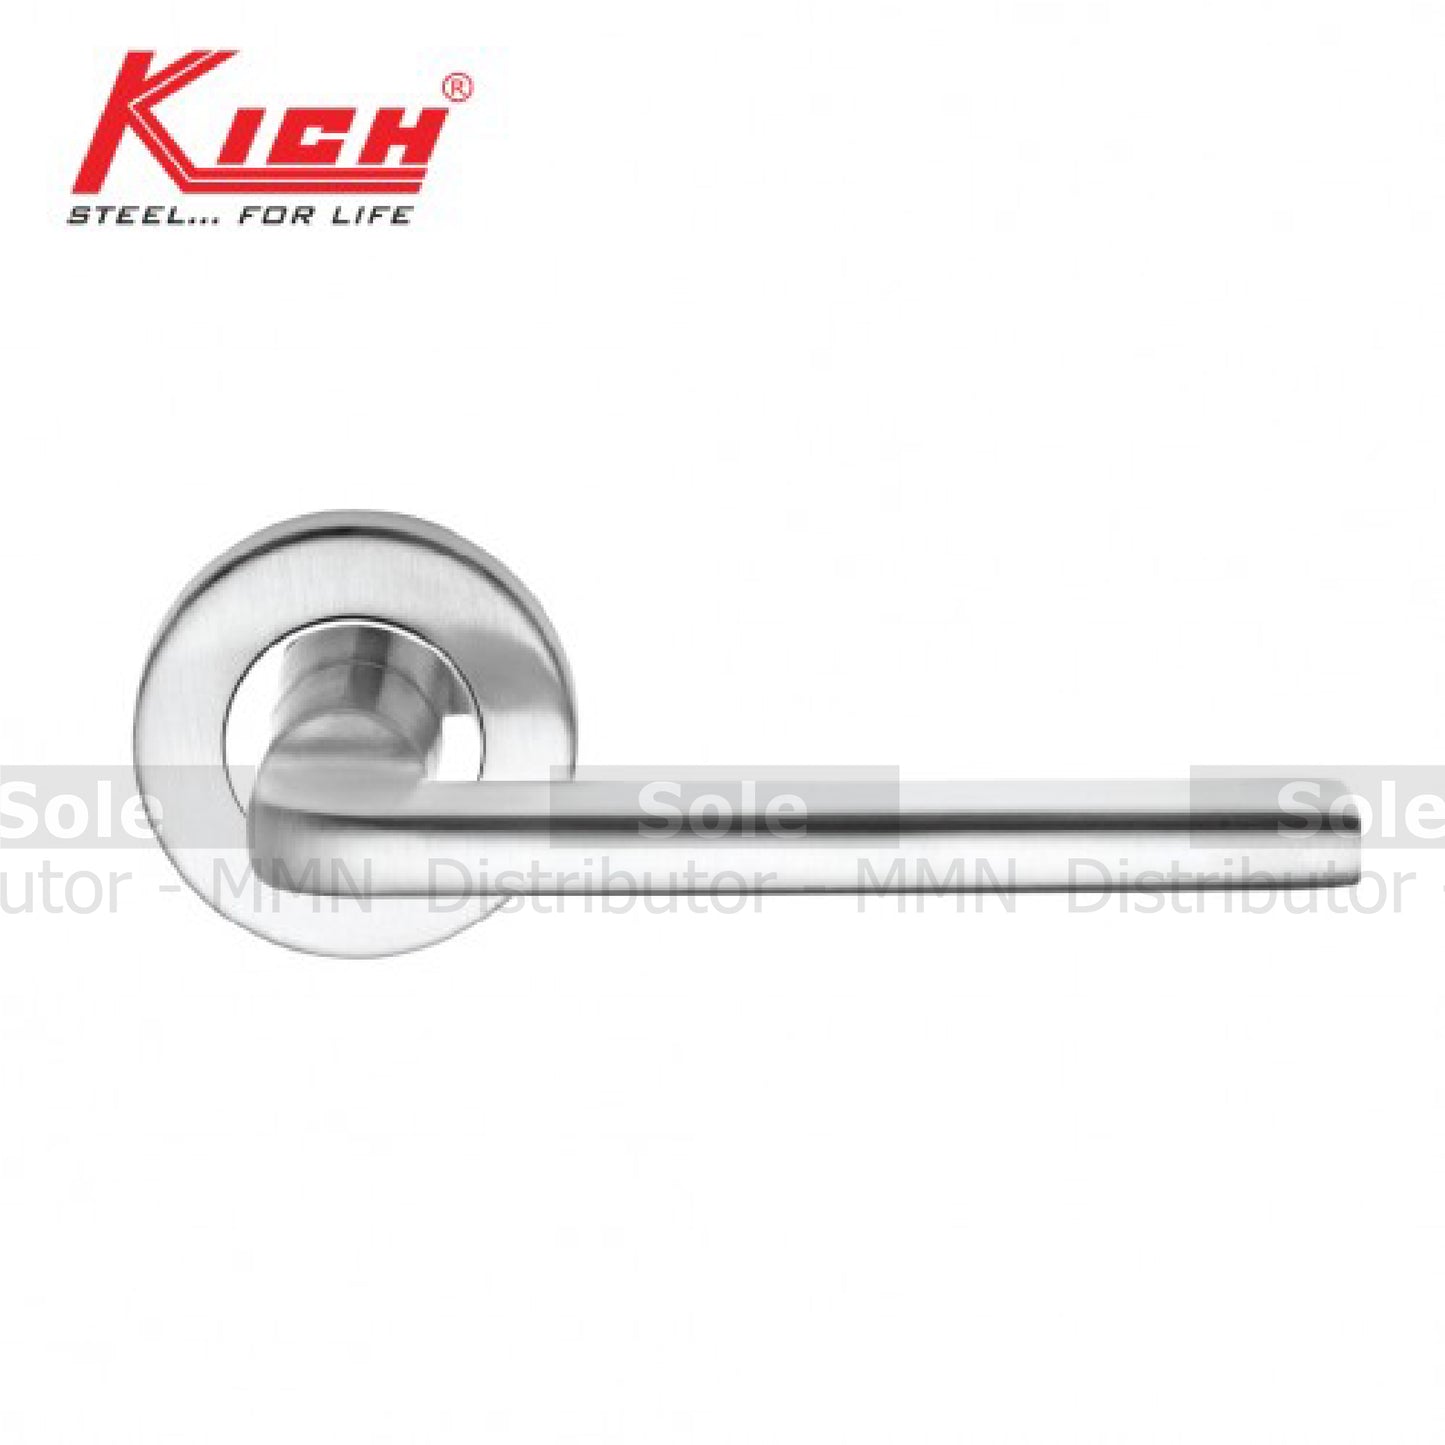 Kich Mortise Lever Handle Set With Escutcheons, Diameter 19mm, 316 Stainless Steel Finish- KMH1964SS